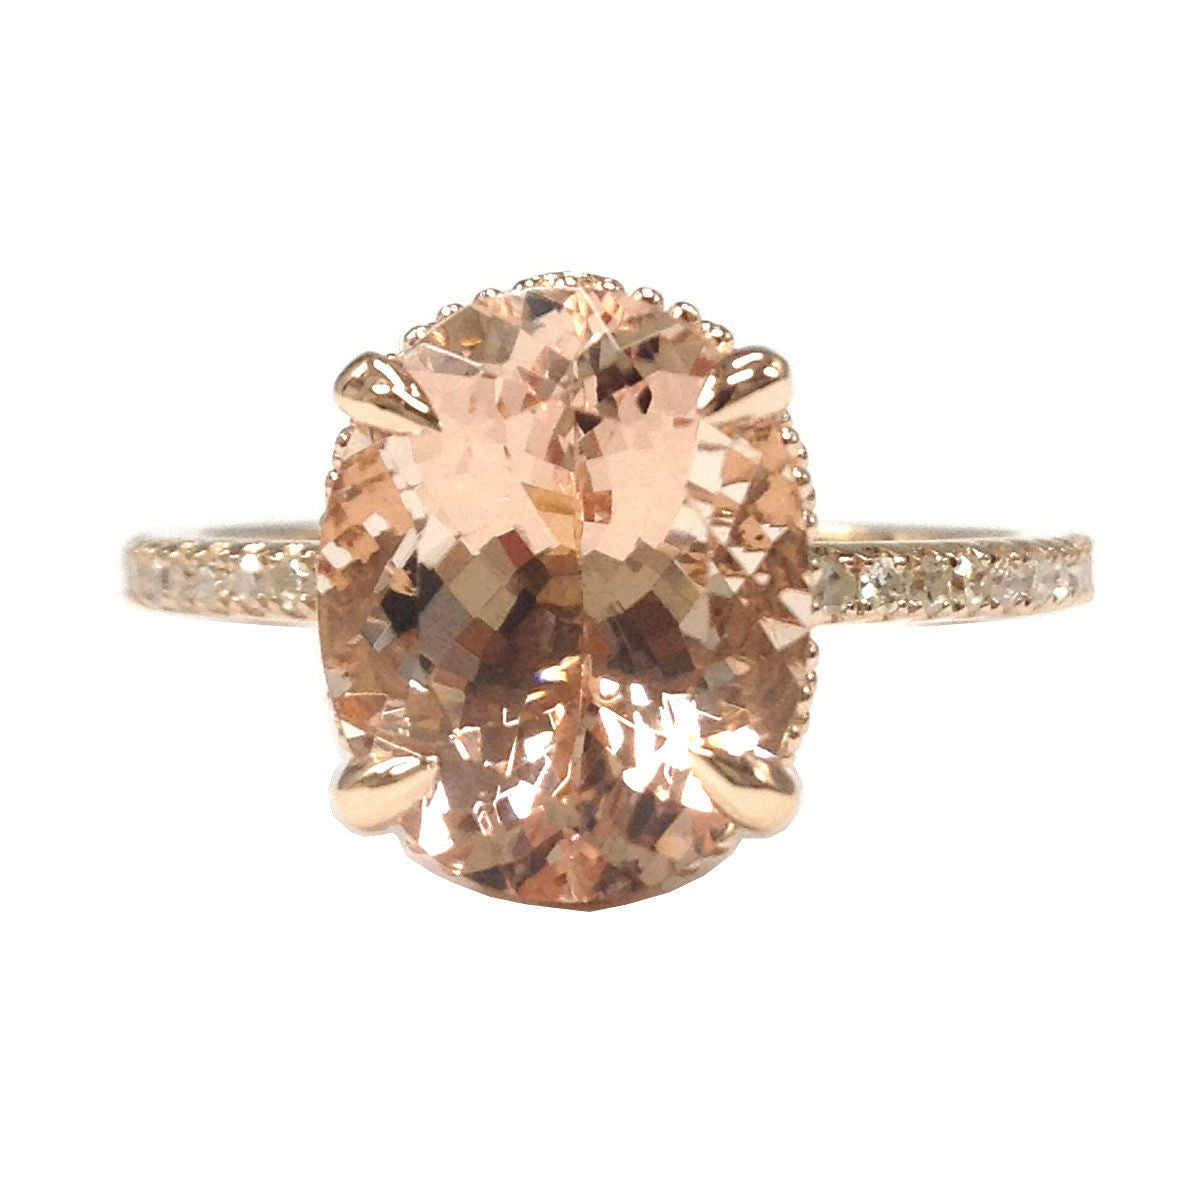 Reserved for Judi, Oval Pink Morganite Engagement Ring Pave Diamond 14K Rose Gold - Lord of Gem Rings - 3